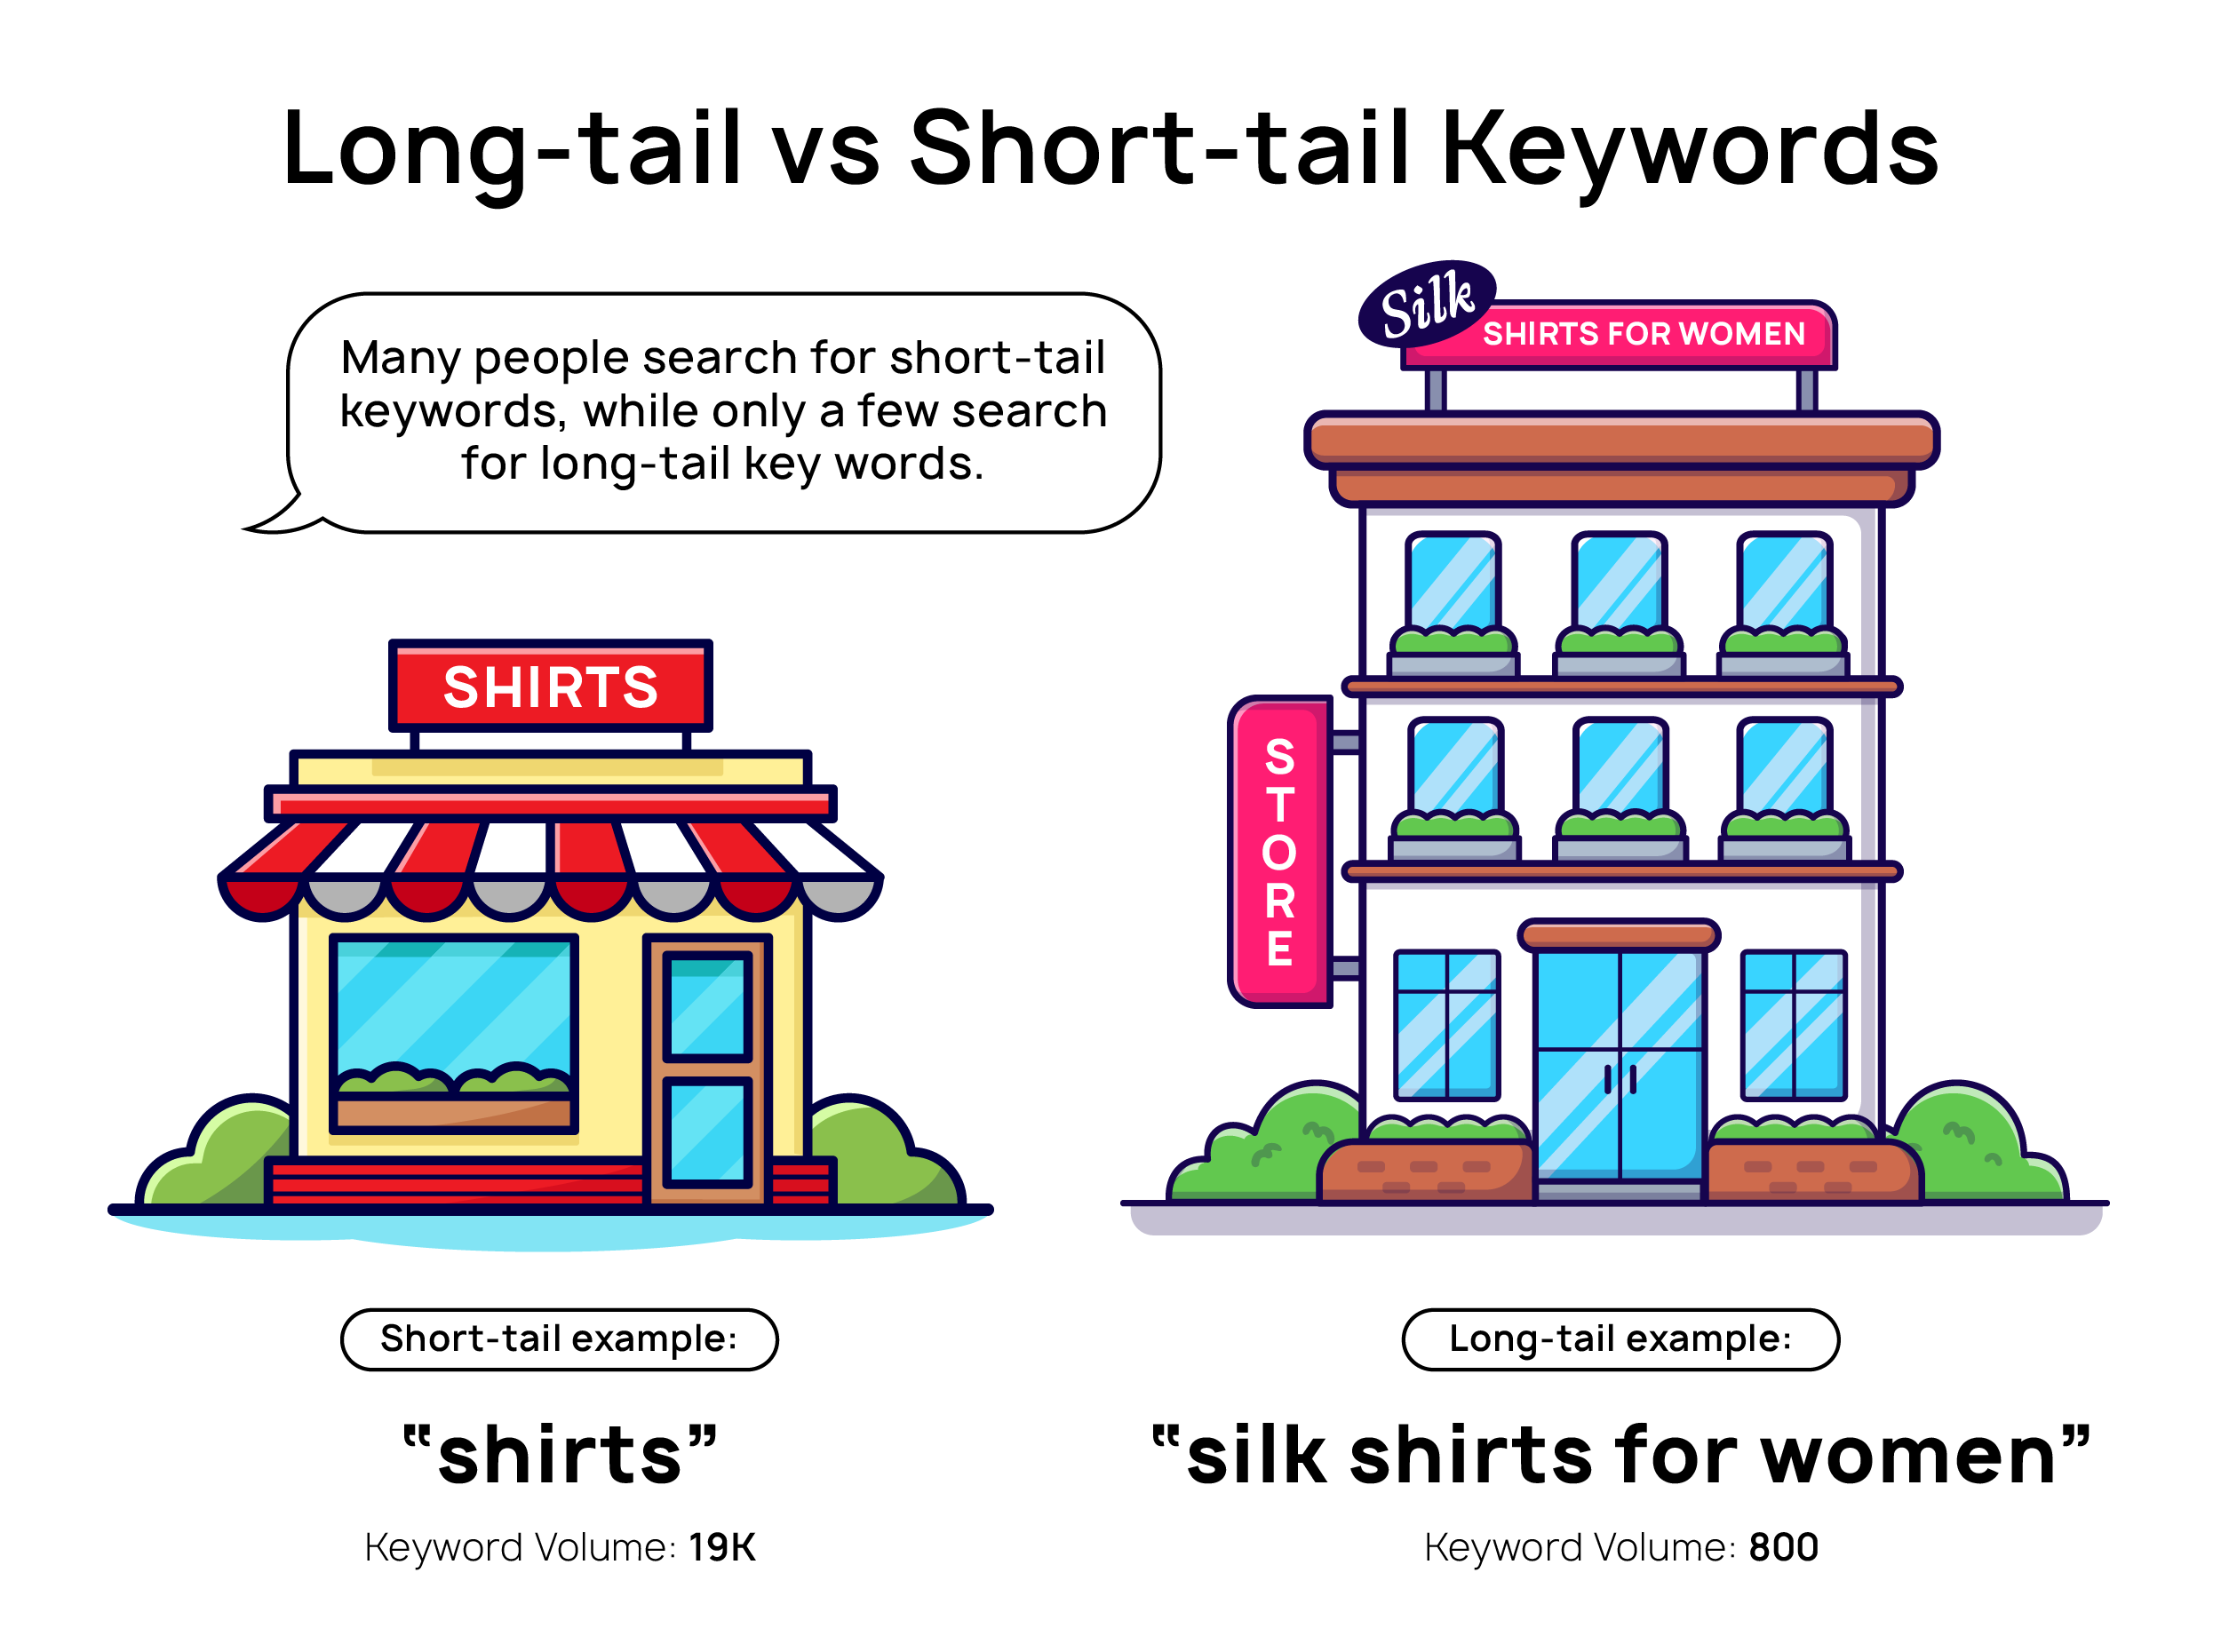 An image of two houses explaining the difference between long-tail keywords and short-tail keywords using "shirt" and "silk shirts for women" as an example.